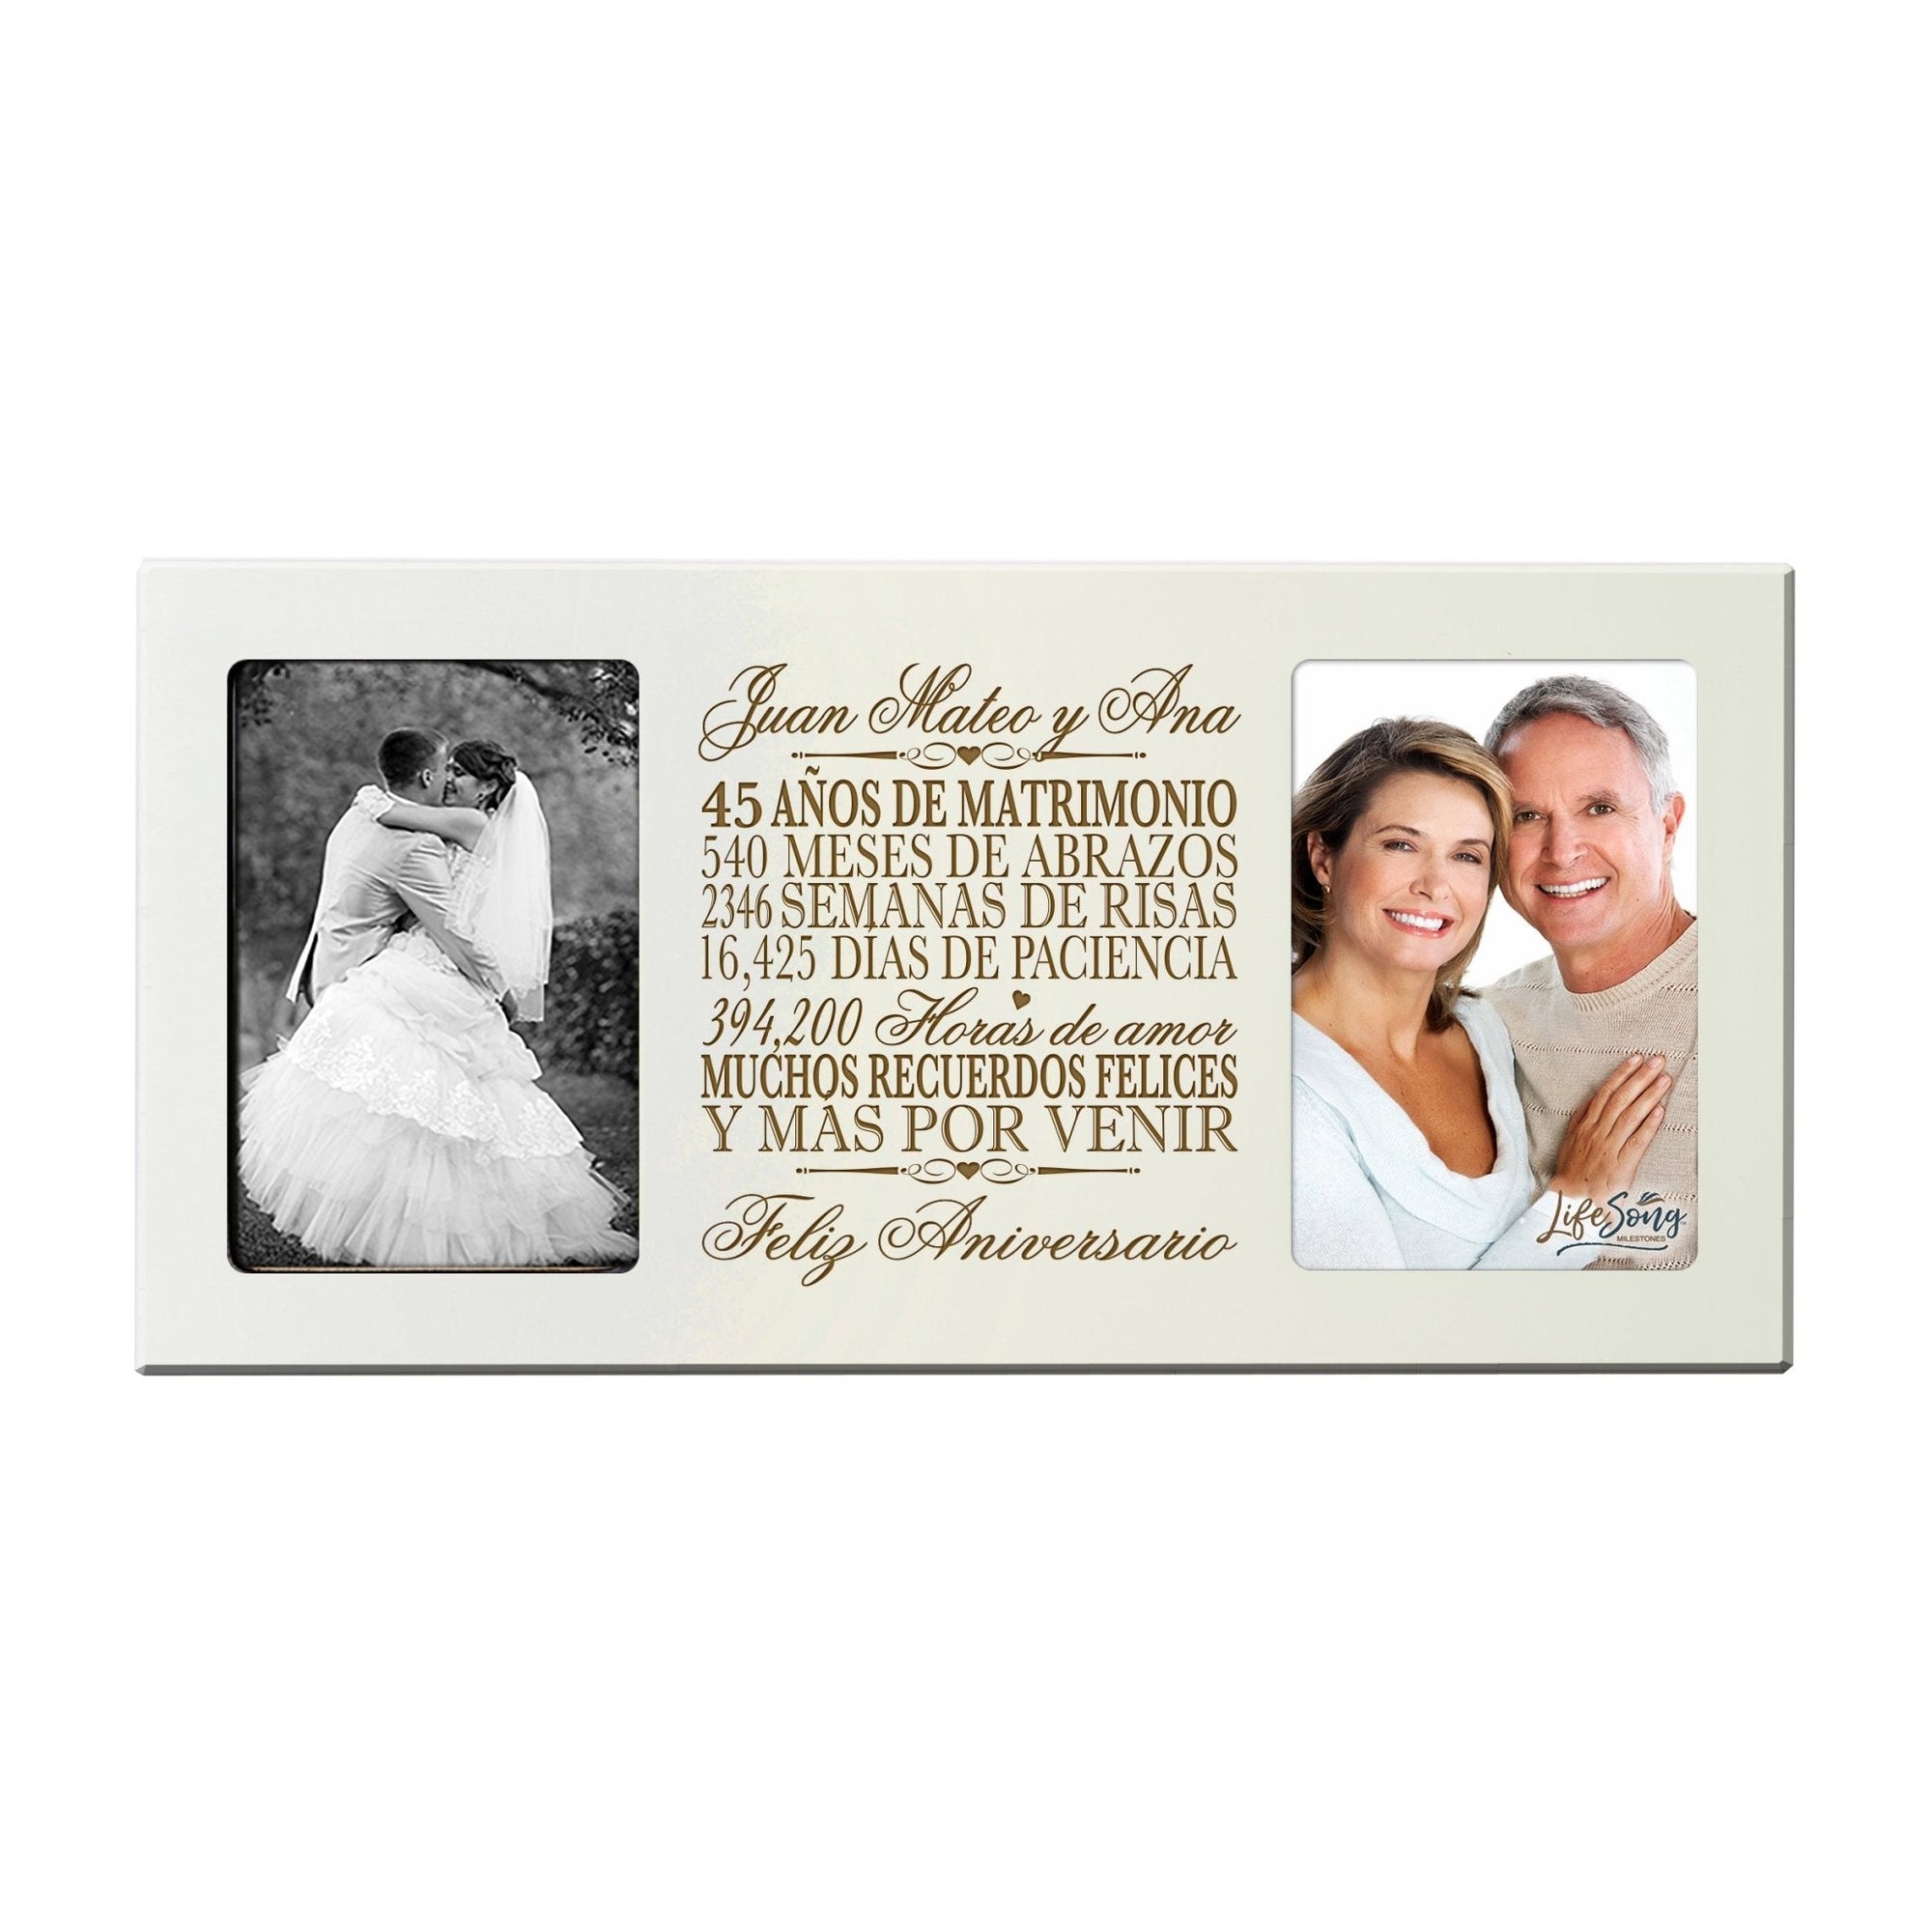 Personalized 45th Anniversary Picture Frame Holds 2-4x6 Photos (Spanish Verse) - LifeSong Milestones